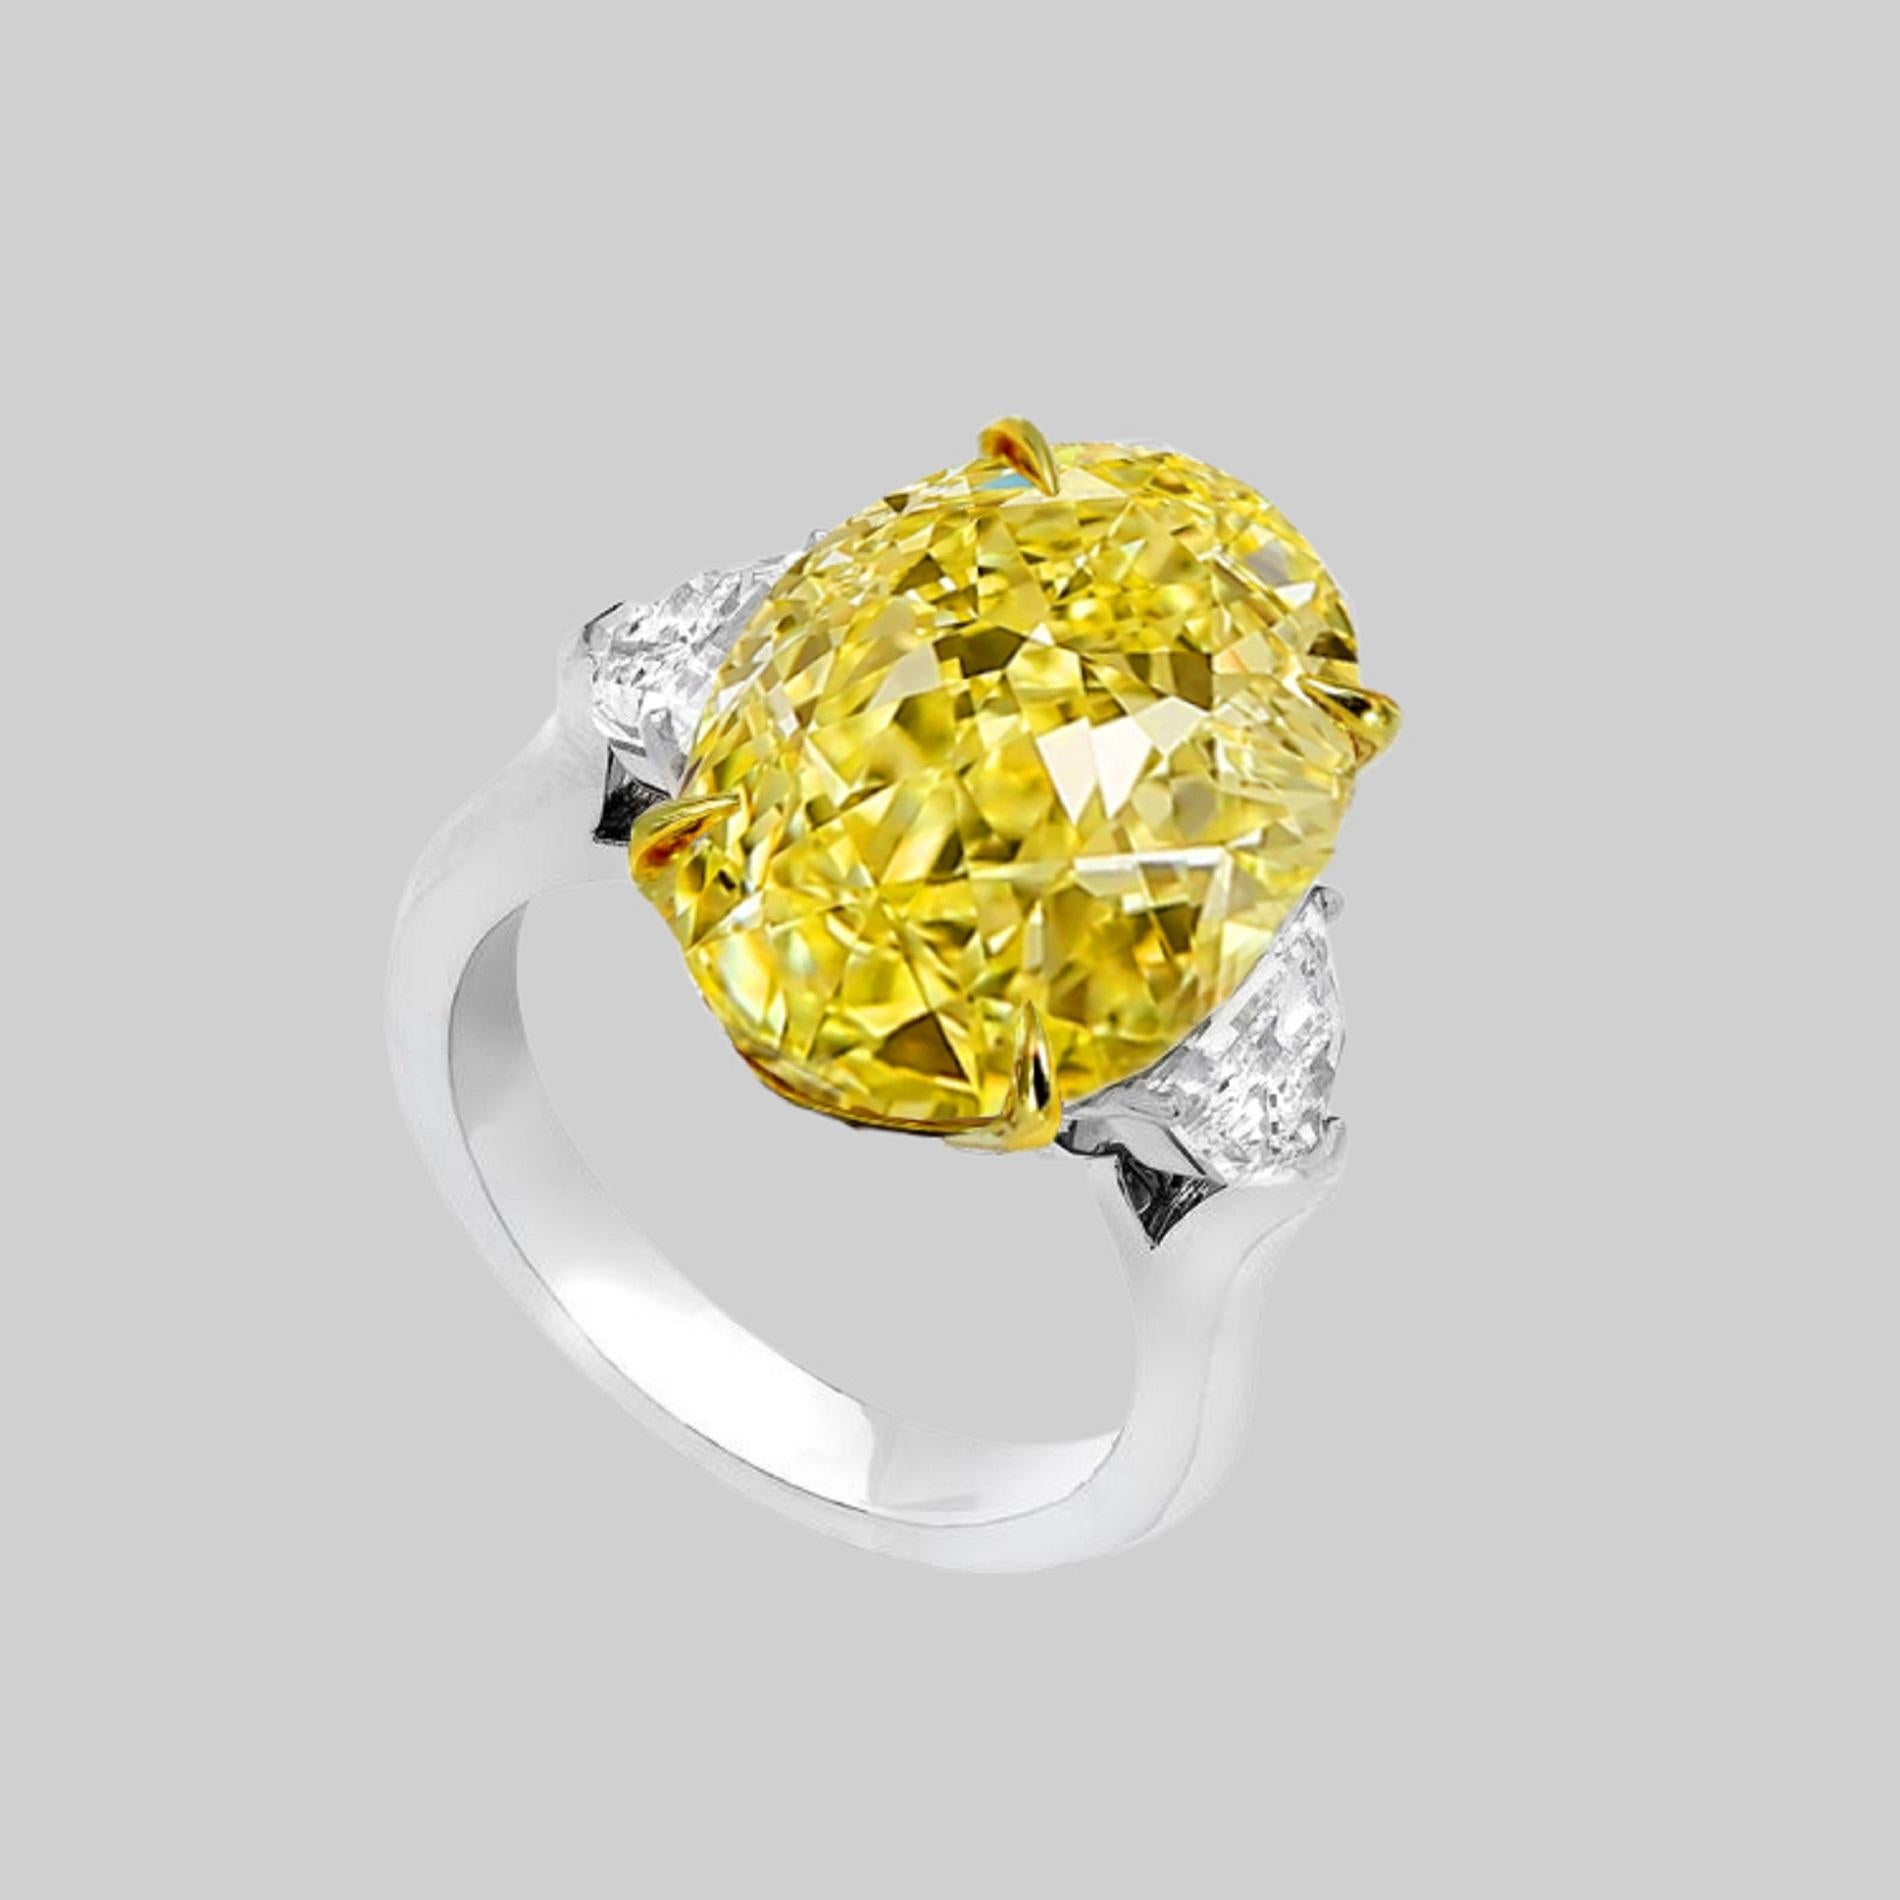 An oval 8 carat natural fancy intense yellow diamond flanked on the sides by two half moon side diamonds 1 carat total F color VVS2  clarity. The three stones are professionally certified by GIA (see certificate pictures for detailed information of